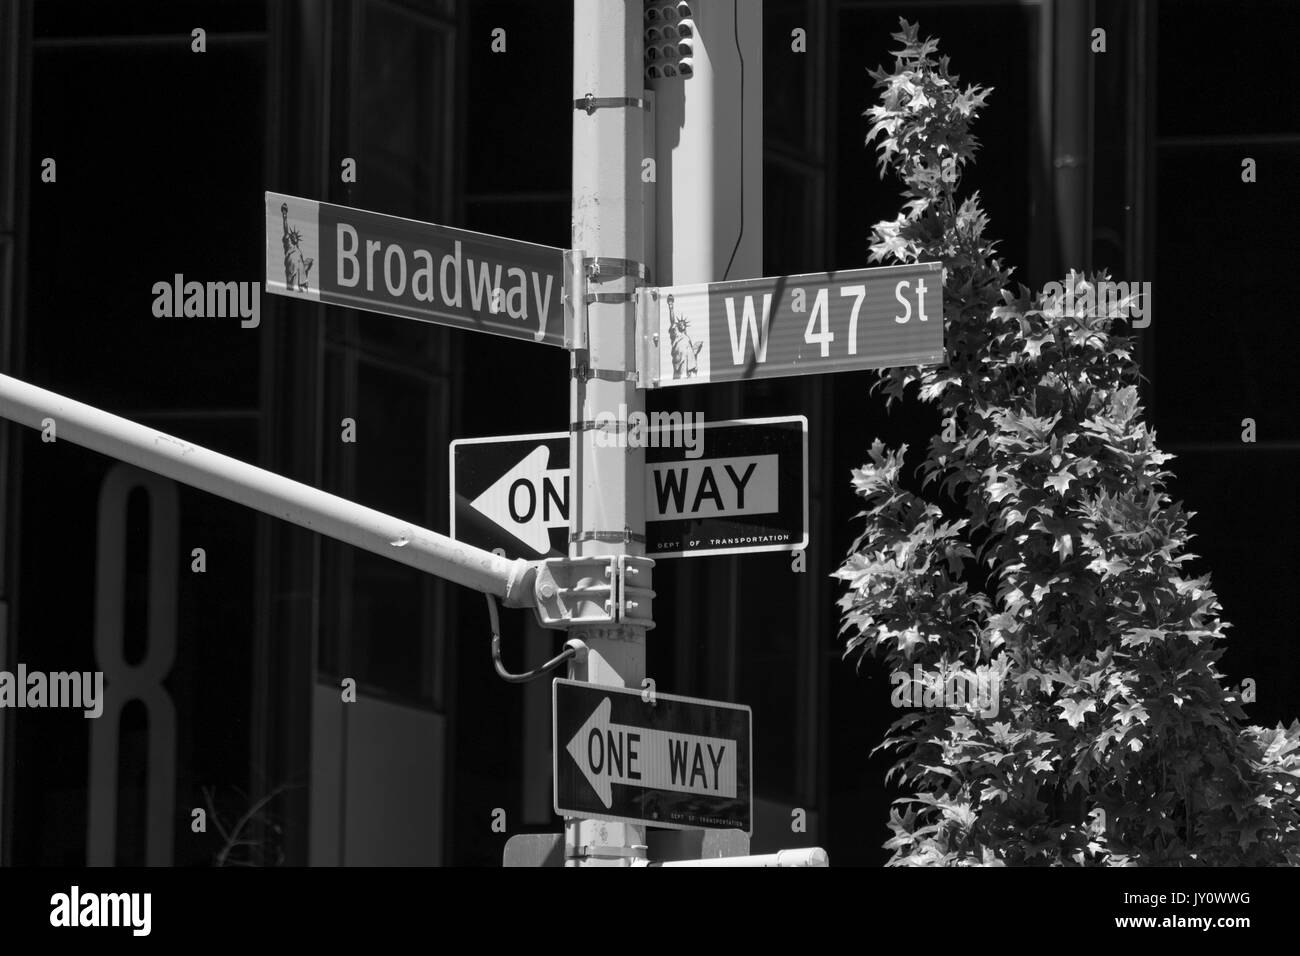 Broadway and W47th Street, New York City Stock Photo